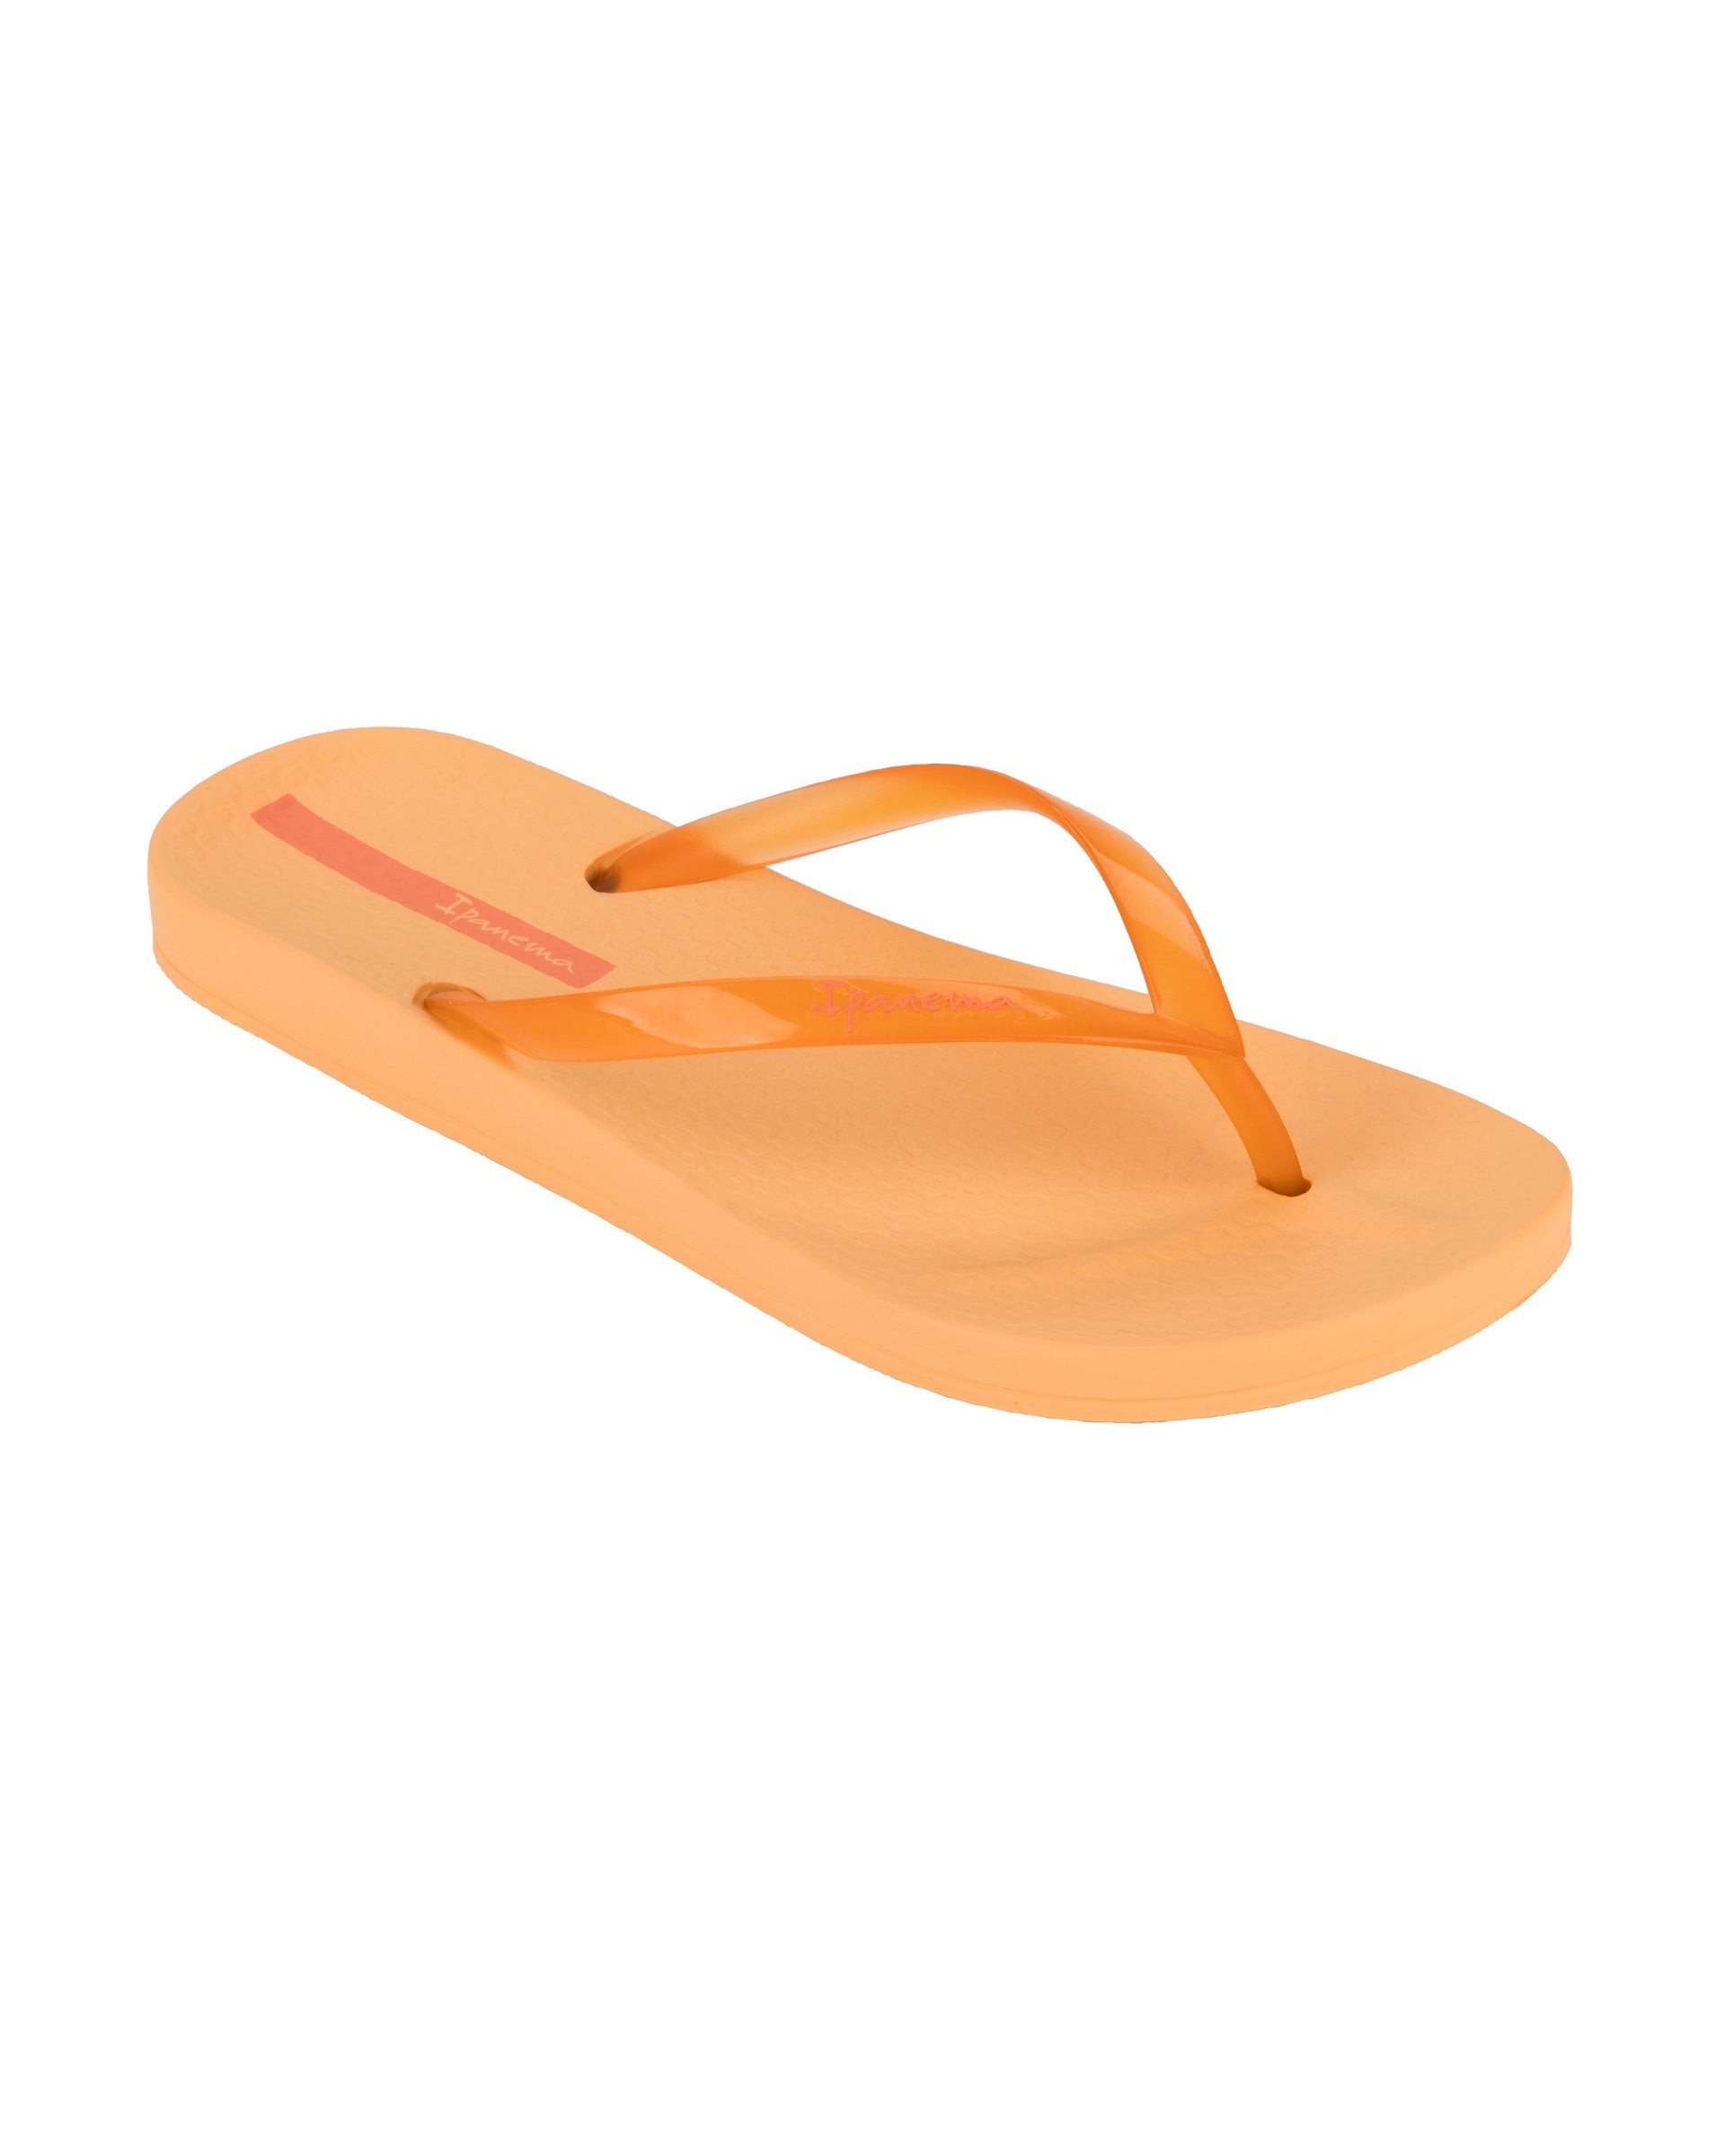 Angled view of a orange Ipanema Ana Connect women's flip flop with a clear orange strap.